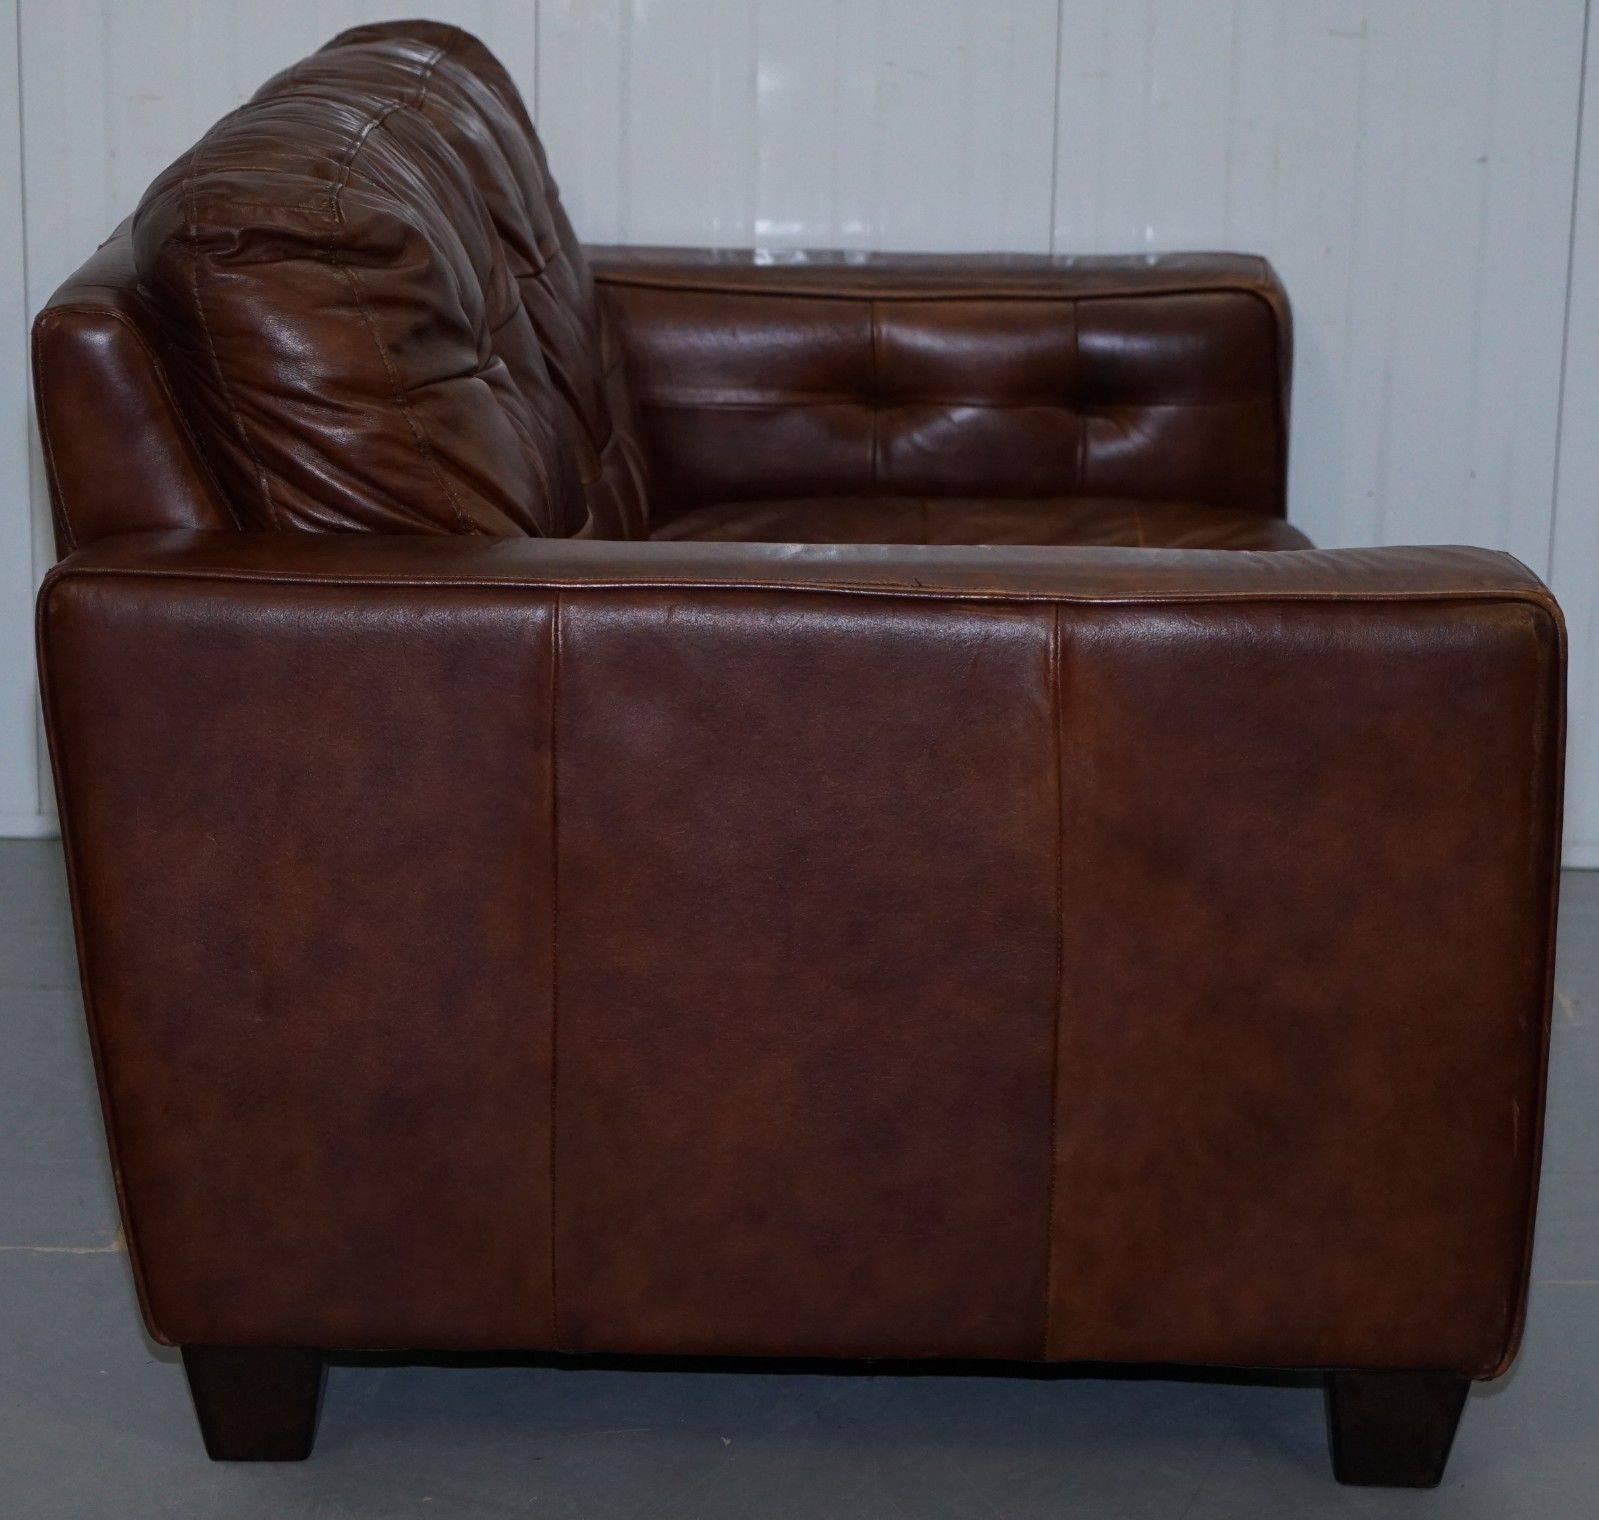 20th Century Knoll Style Aged Brown Leather Sofa Chesterfield Style Buttoning Two-Seat Sofa